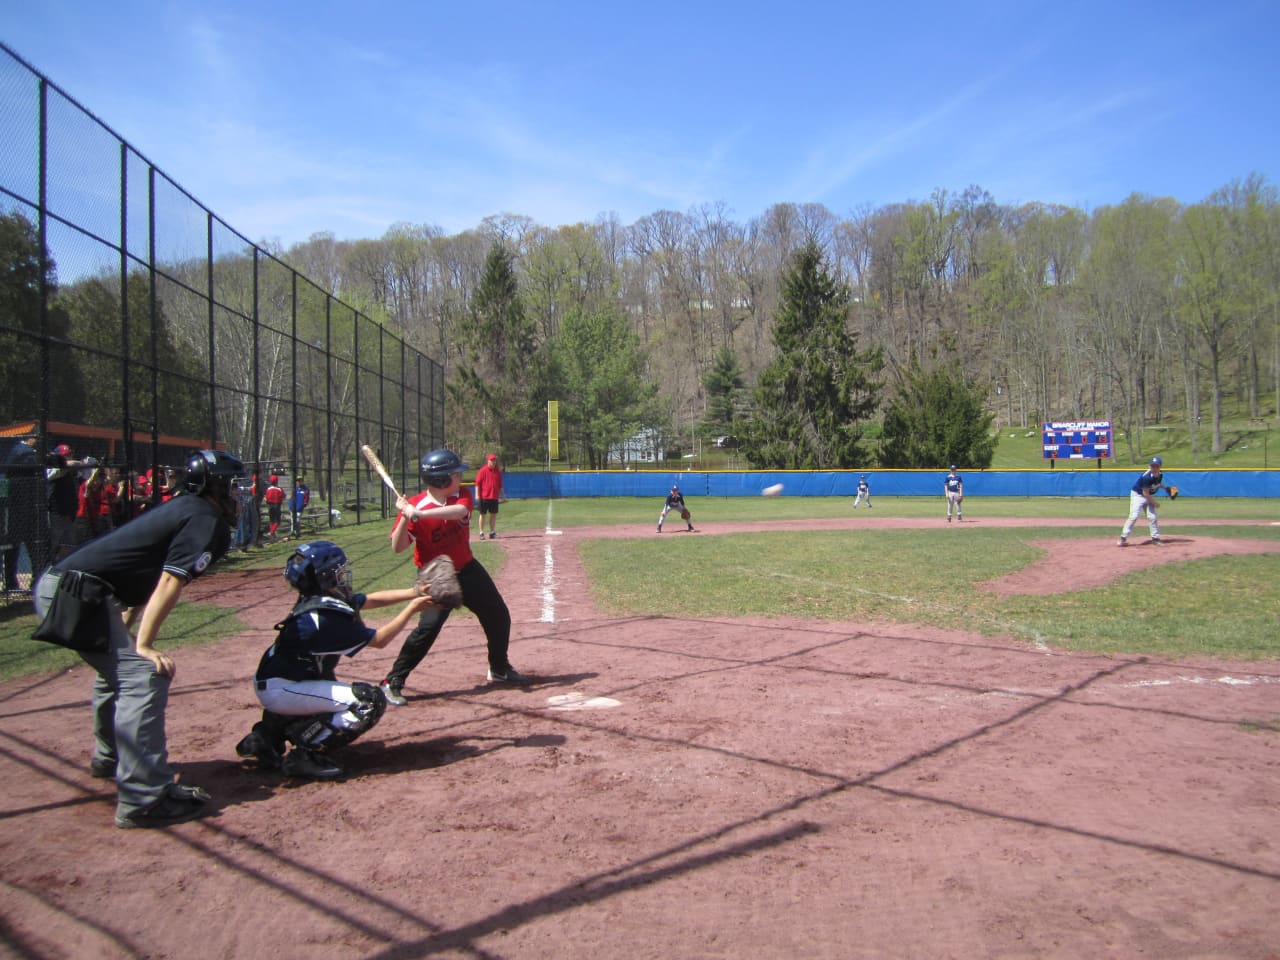 The final day to register children for Briarcliff Manor Little League is Friday.